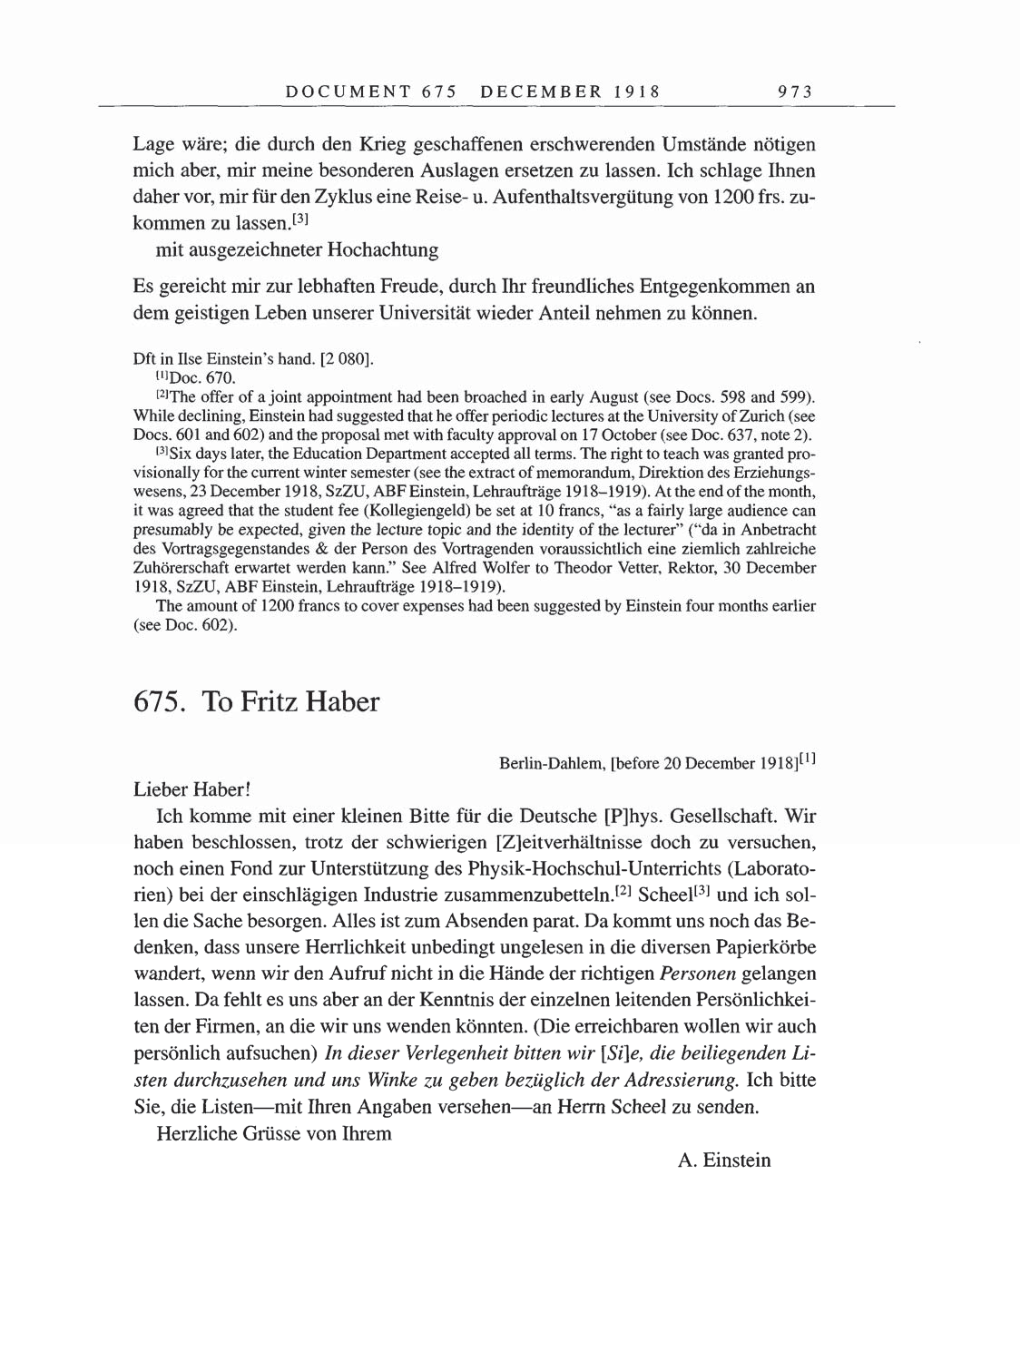 Volume 8, Part B: The Berlin Years: Correspondence 1918 page 973